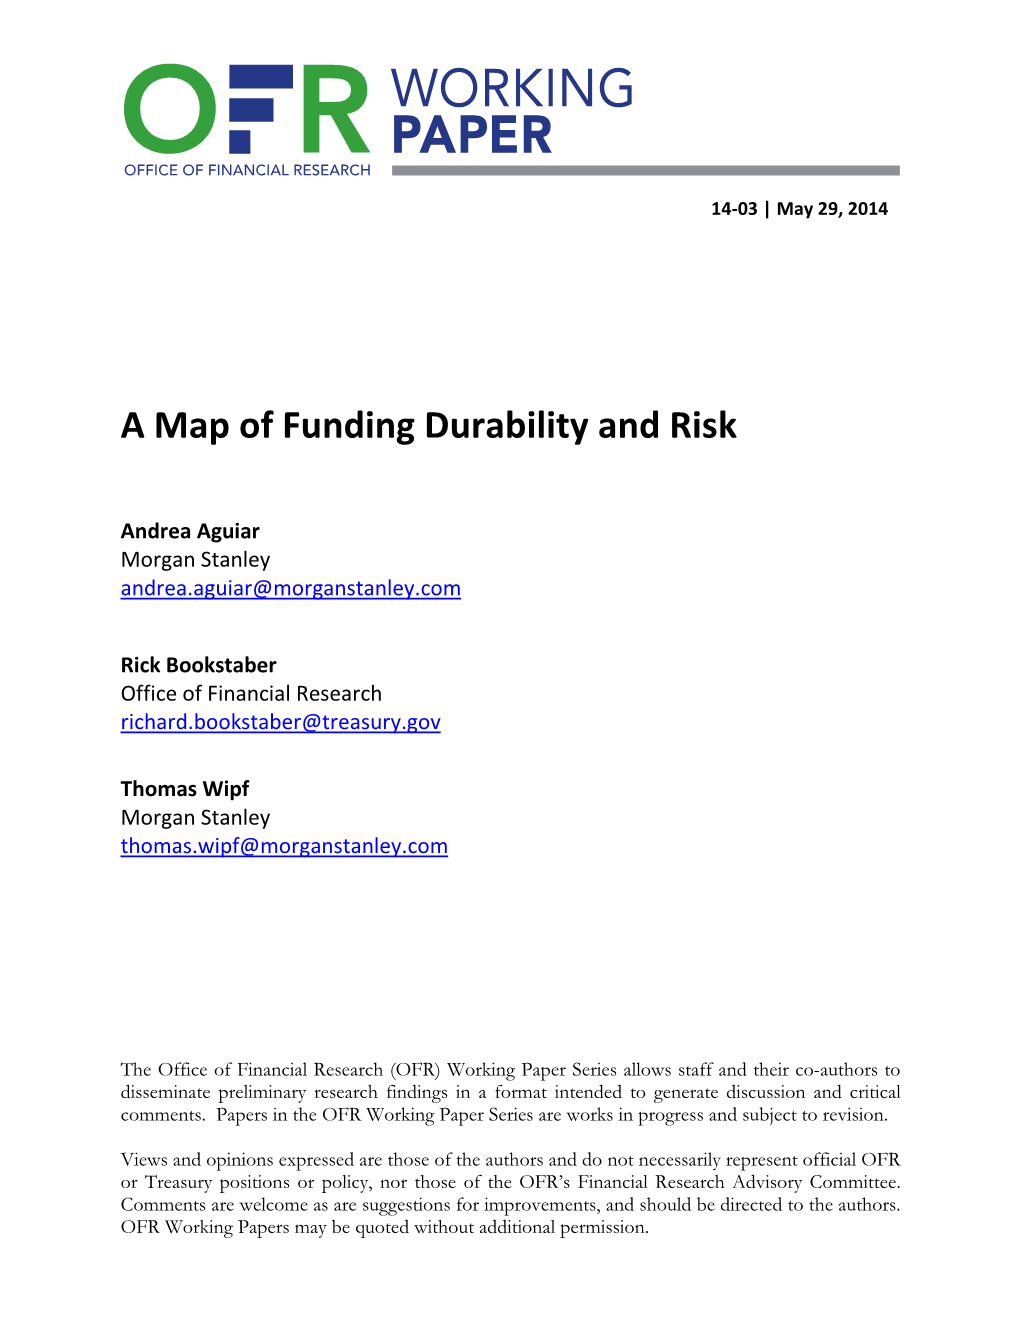 A Map of Funding Durability and Risk